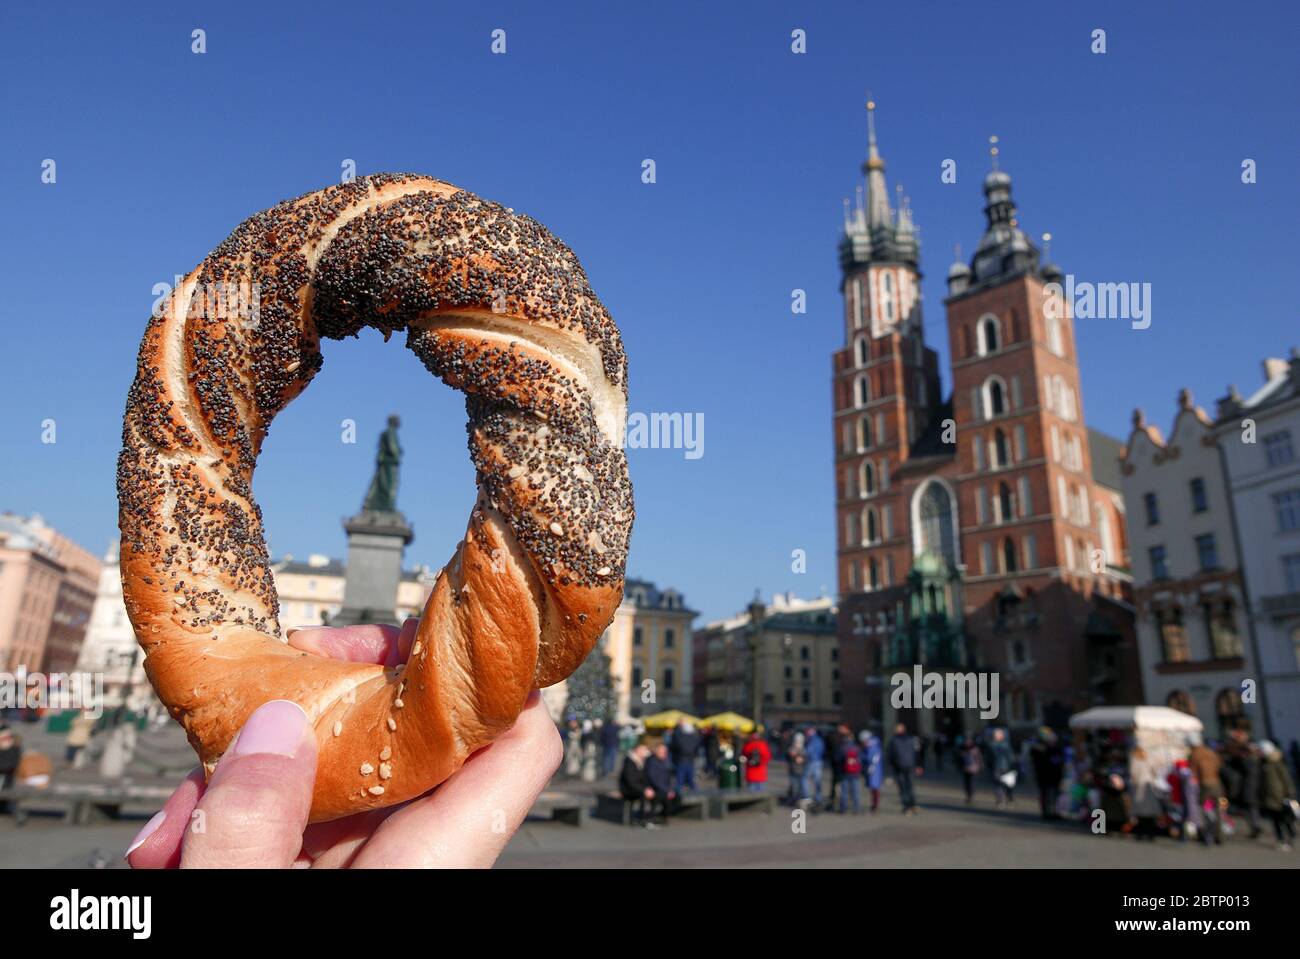 Woman hand holding bagel / obwarzanek, traditional polish snack. The Mariacka Tower in the background. Stock Photo